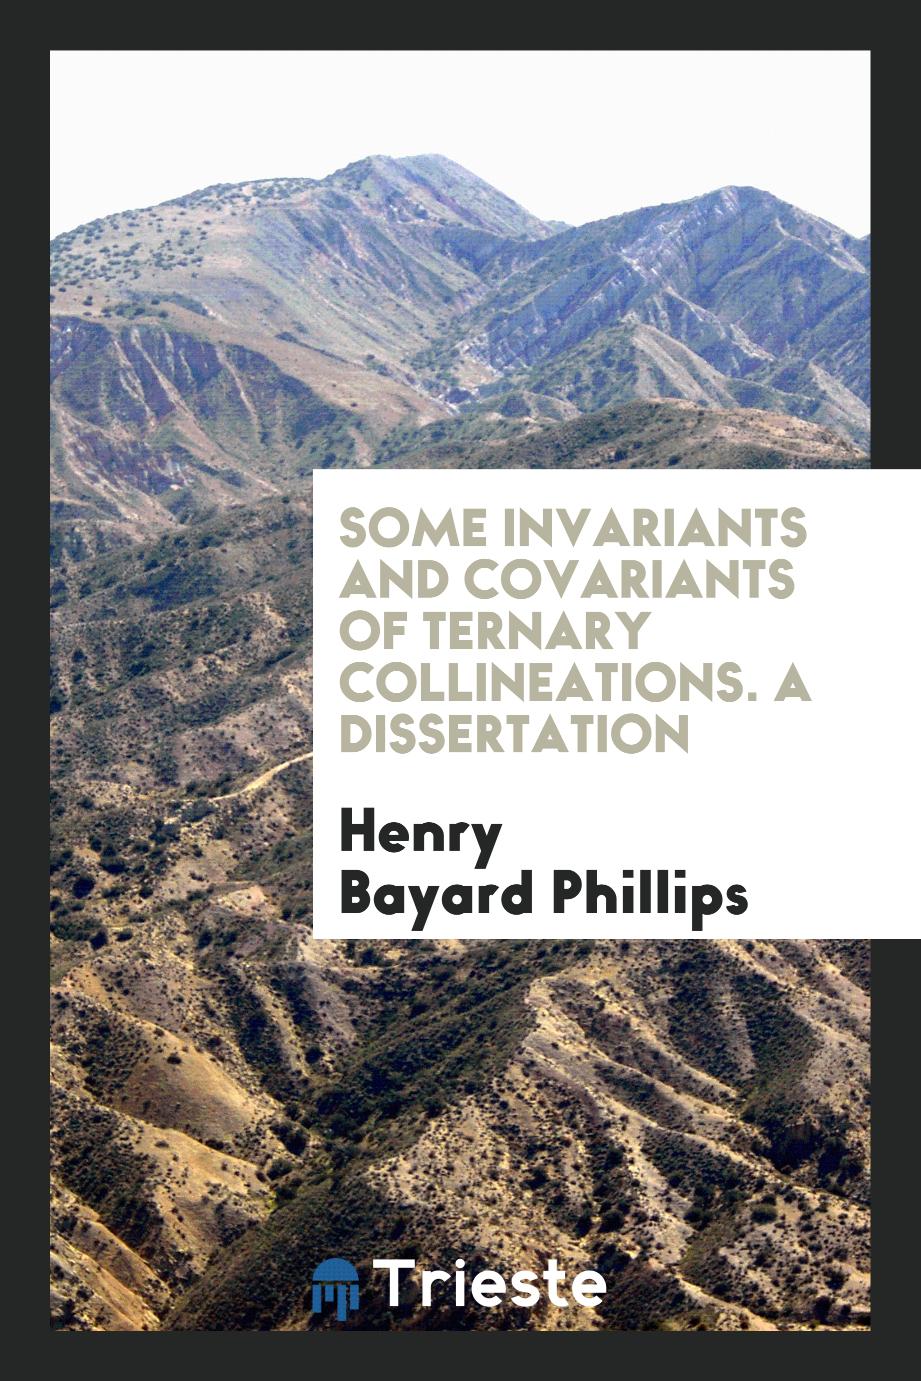 Some invariants and covariants of ternary collineations. A dissertation